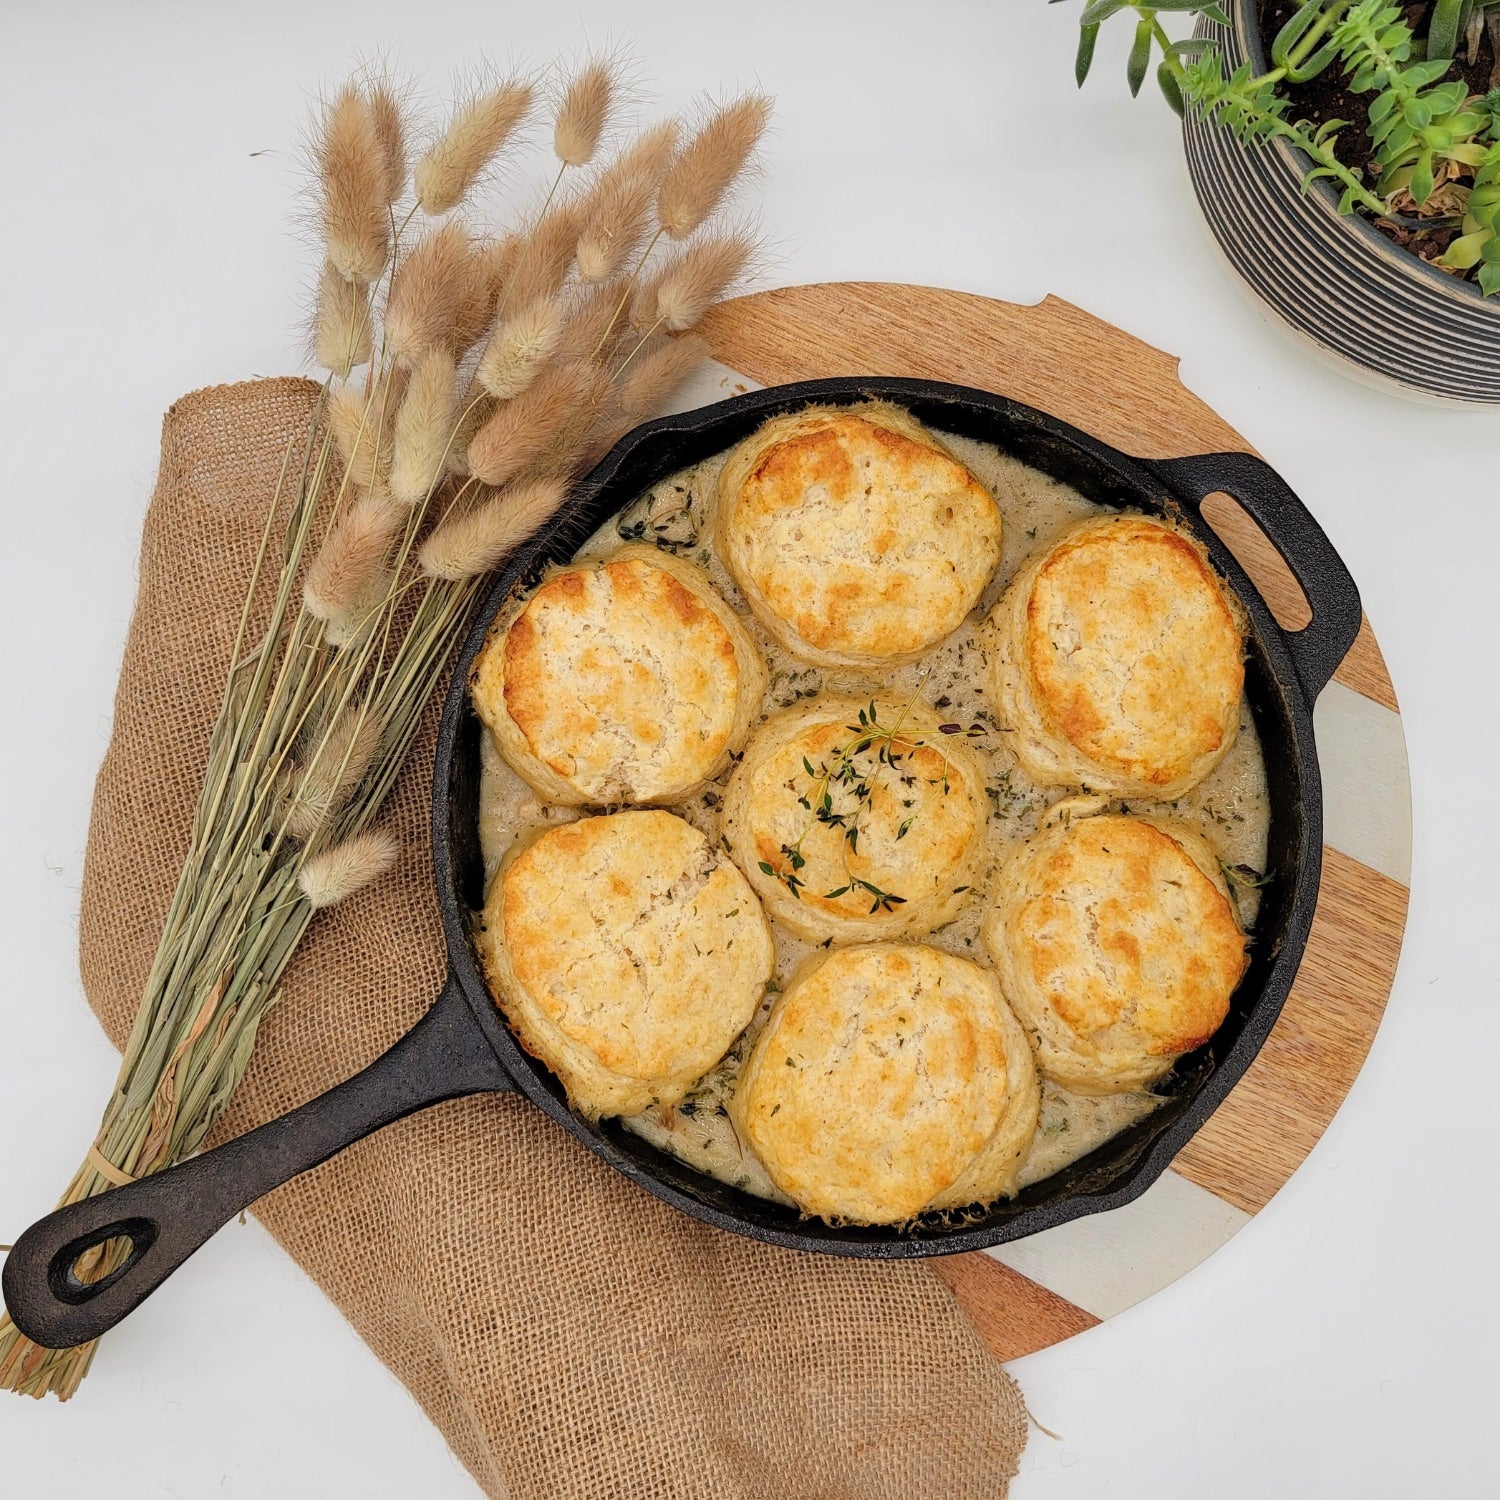 biscuits and cast iron skillet